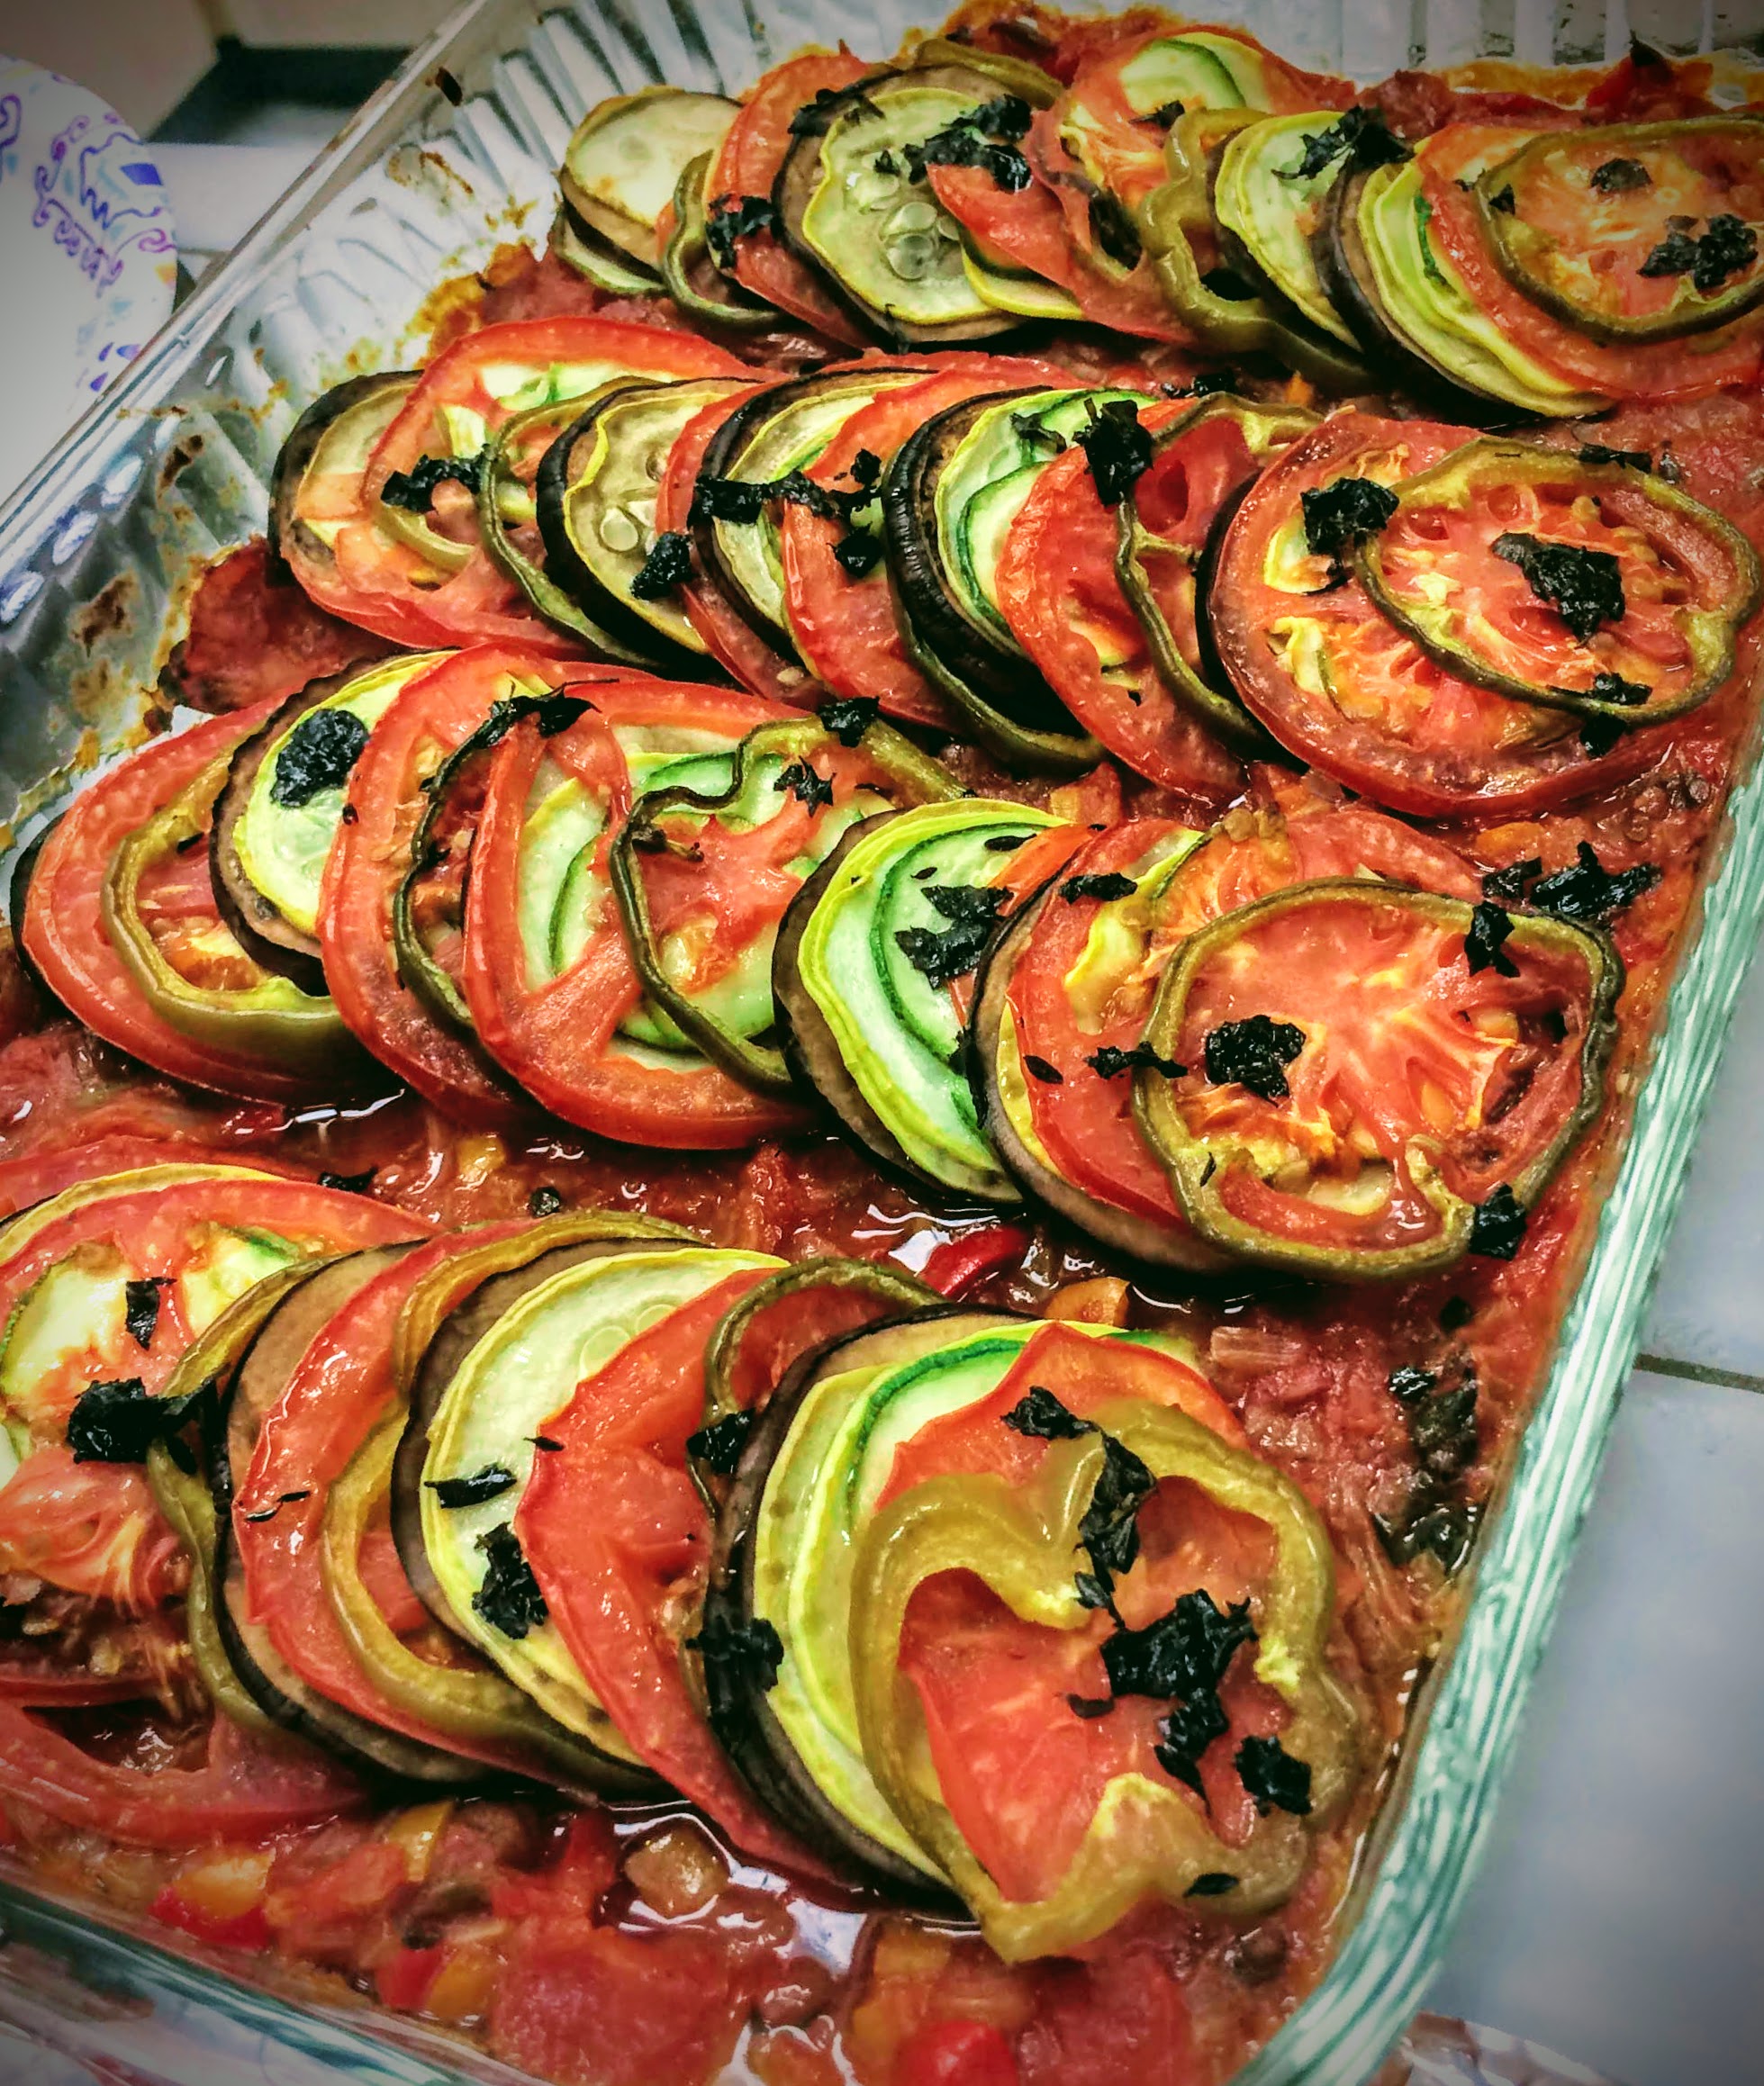 baked ratatouille. Layers of eggplant, tomatoes, peppers with basil sprinkled over.